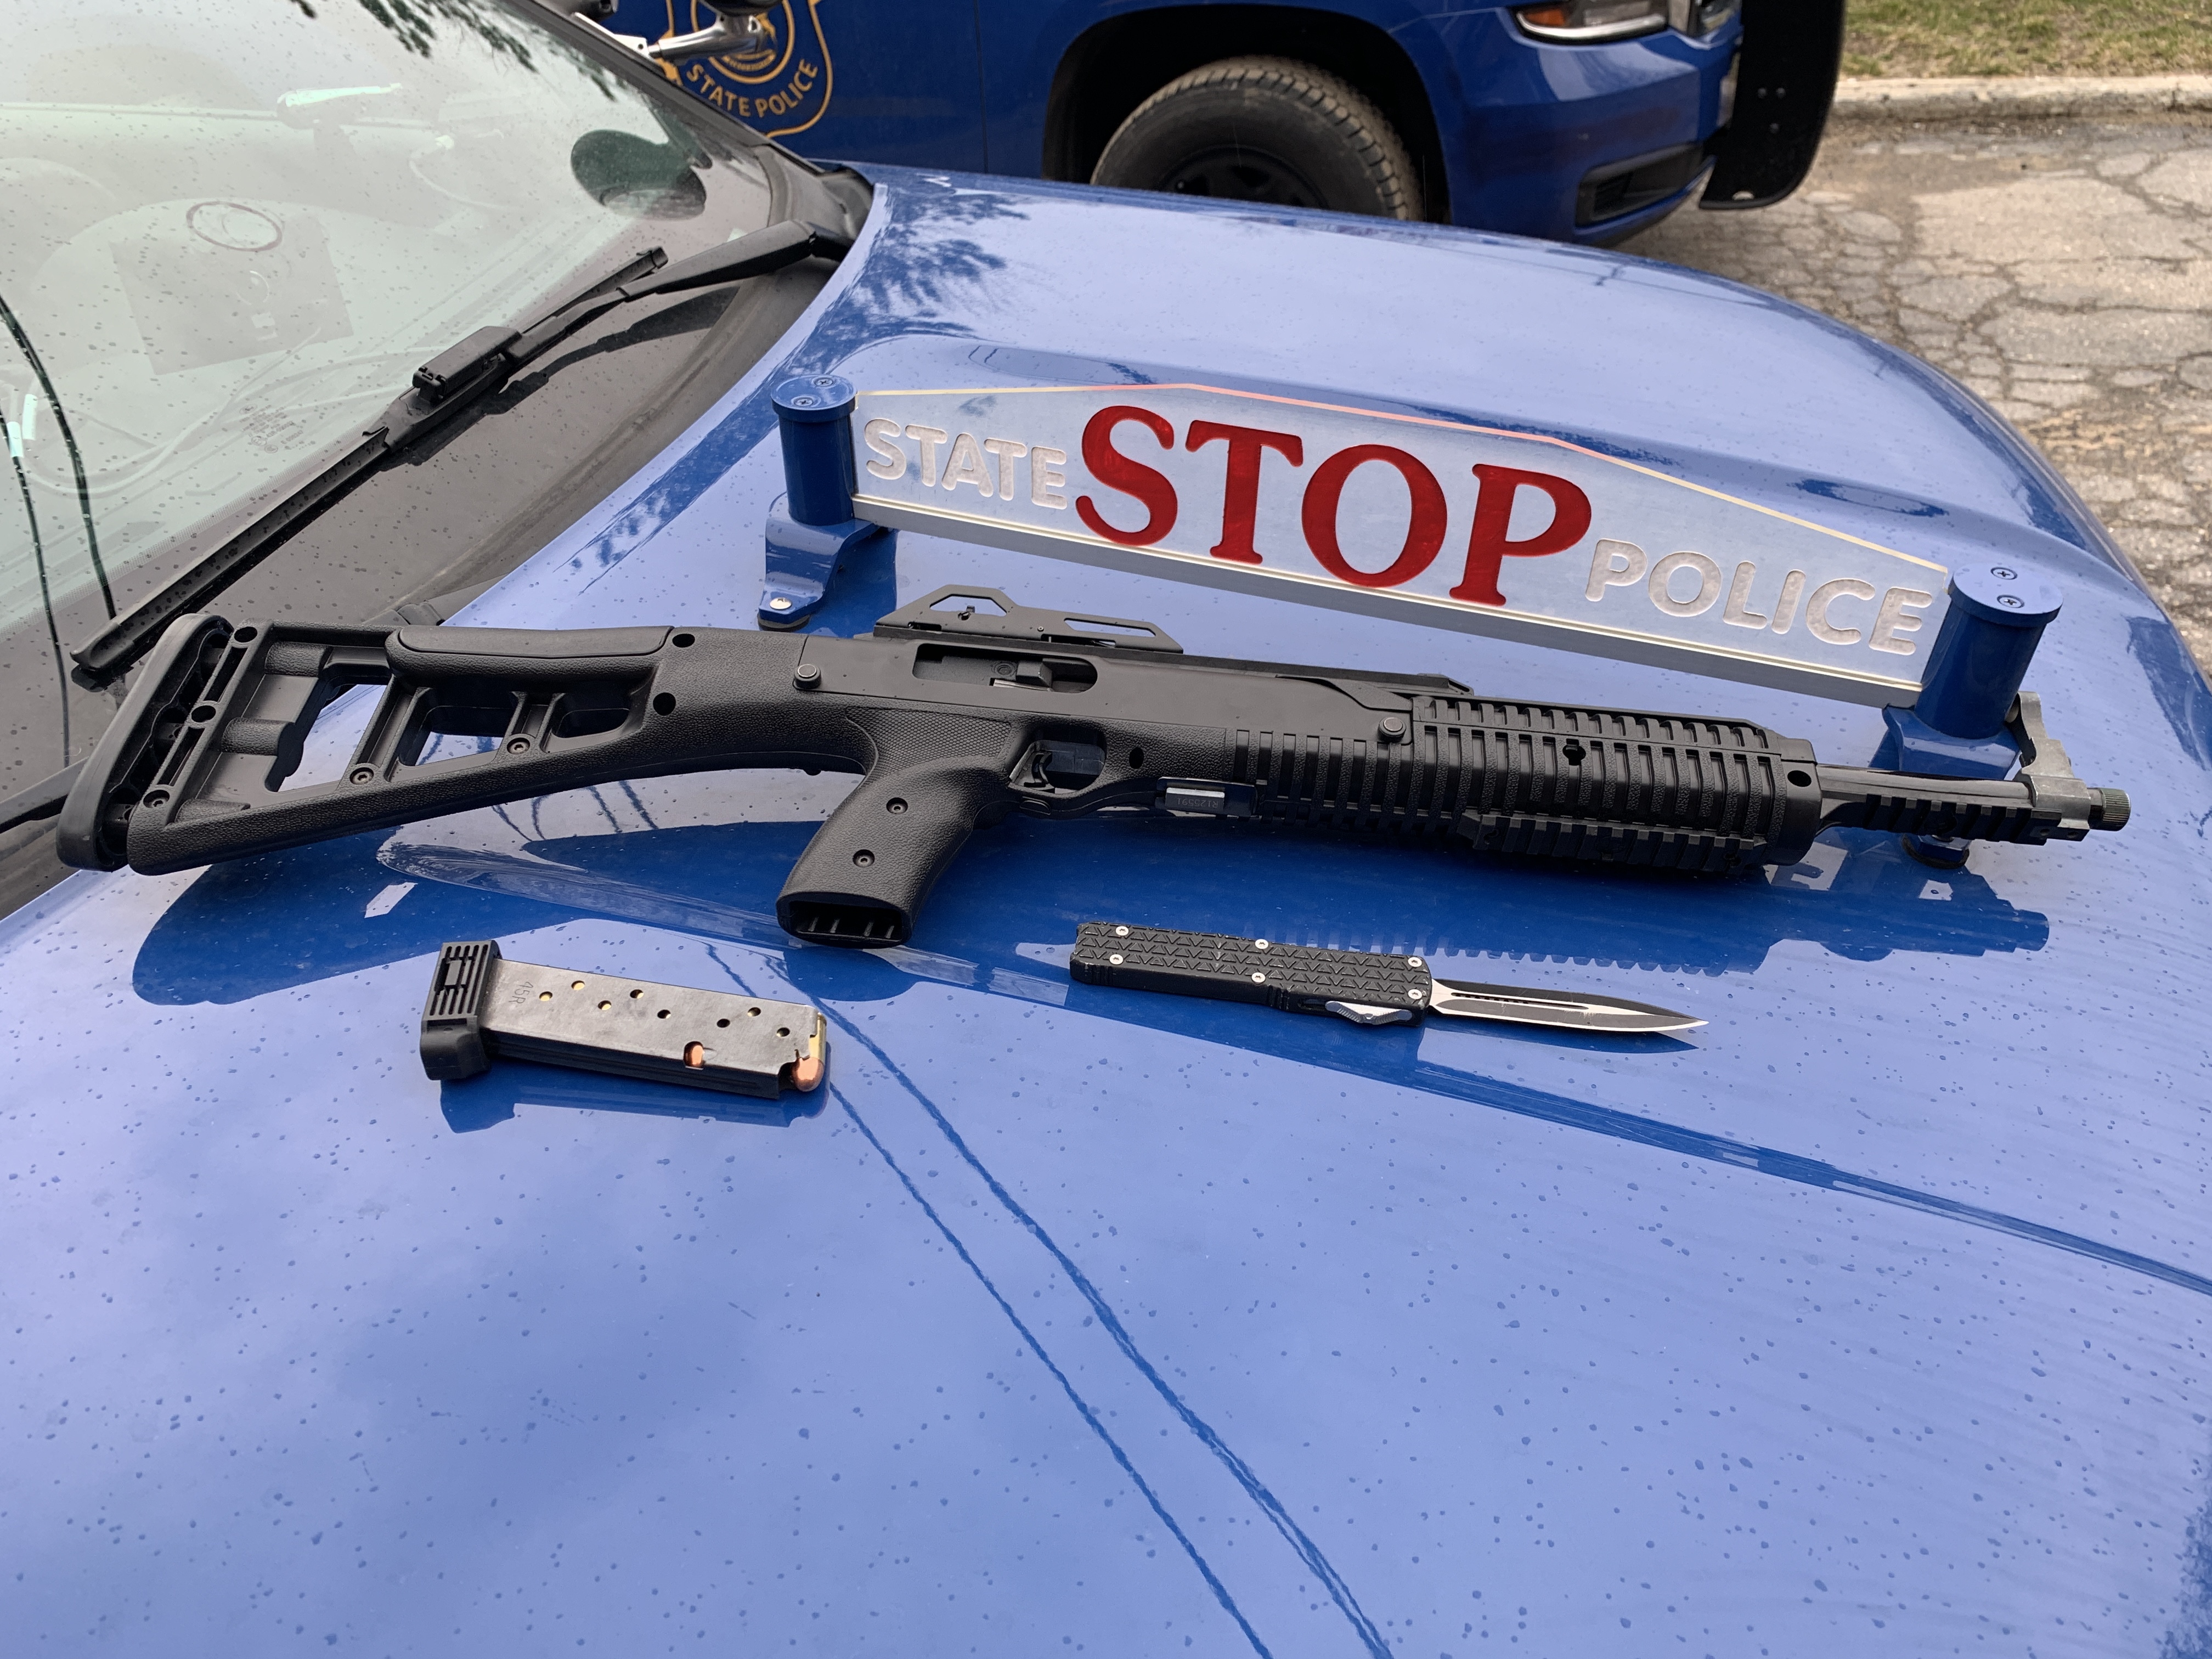 Troopers nab driver they say repeatedly blew through stop signs in Grand Traverse; also find weapons in the vehicle